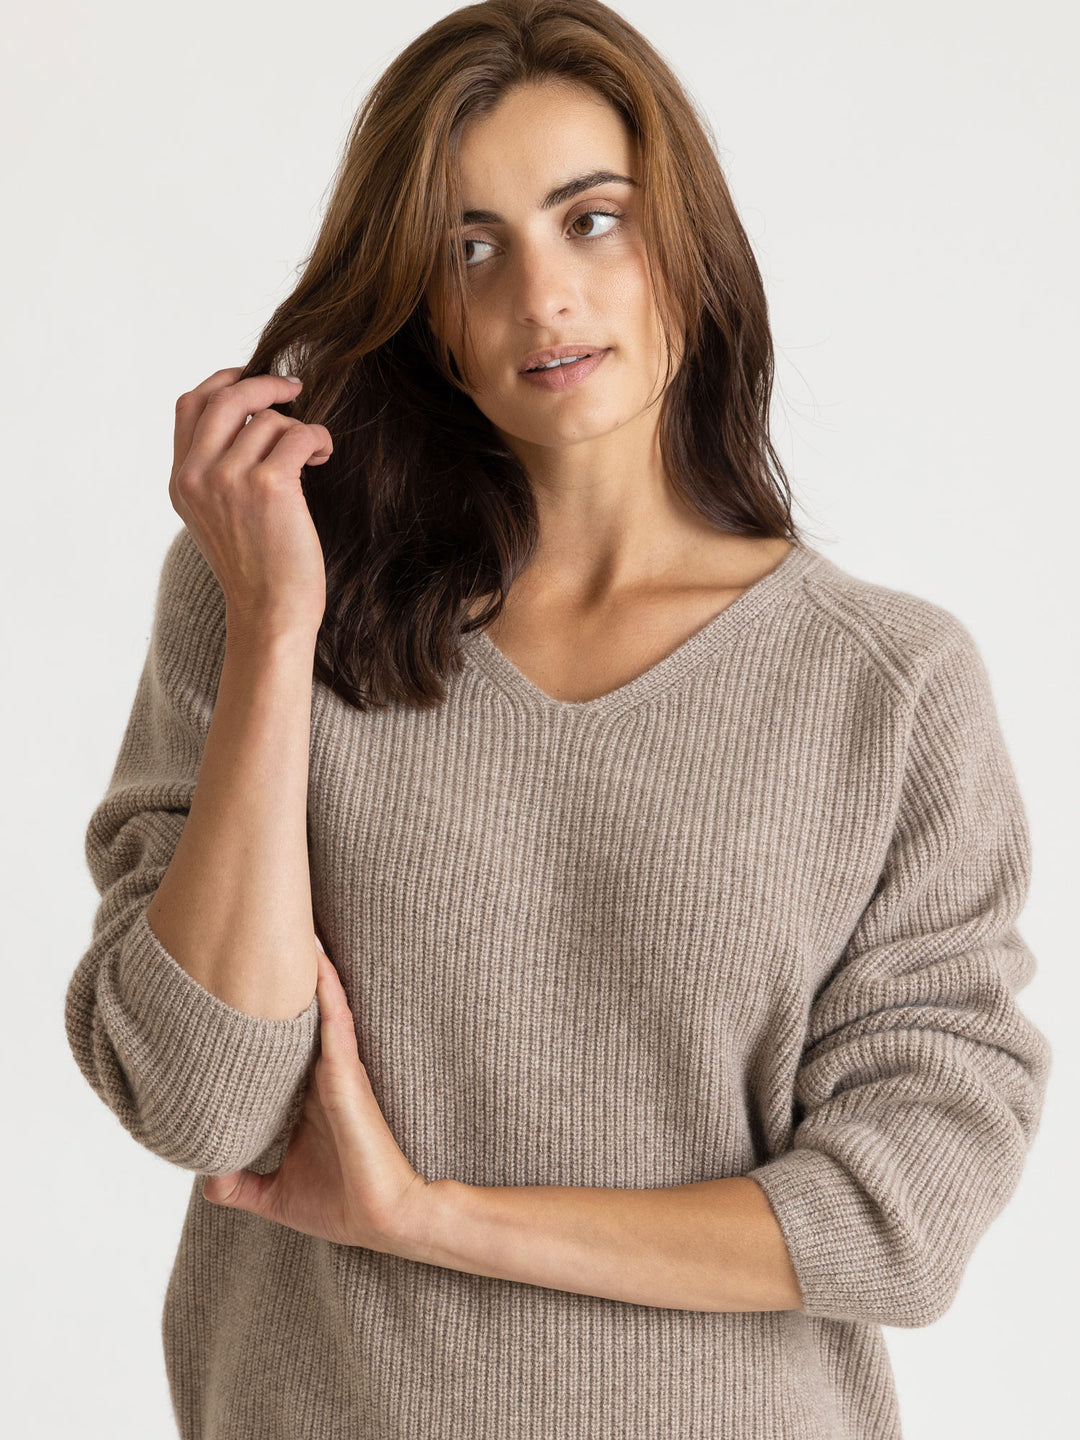 Cashmere sweater, long sleeved, rib knit, 100% pure cashmere, non itching, supersoft, warm, toast, brown